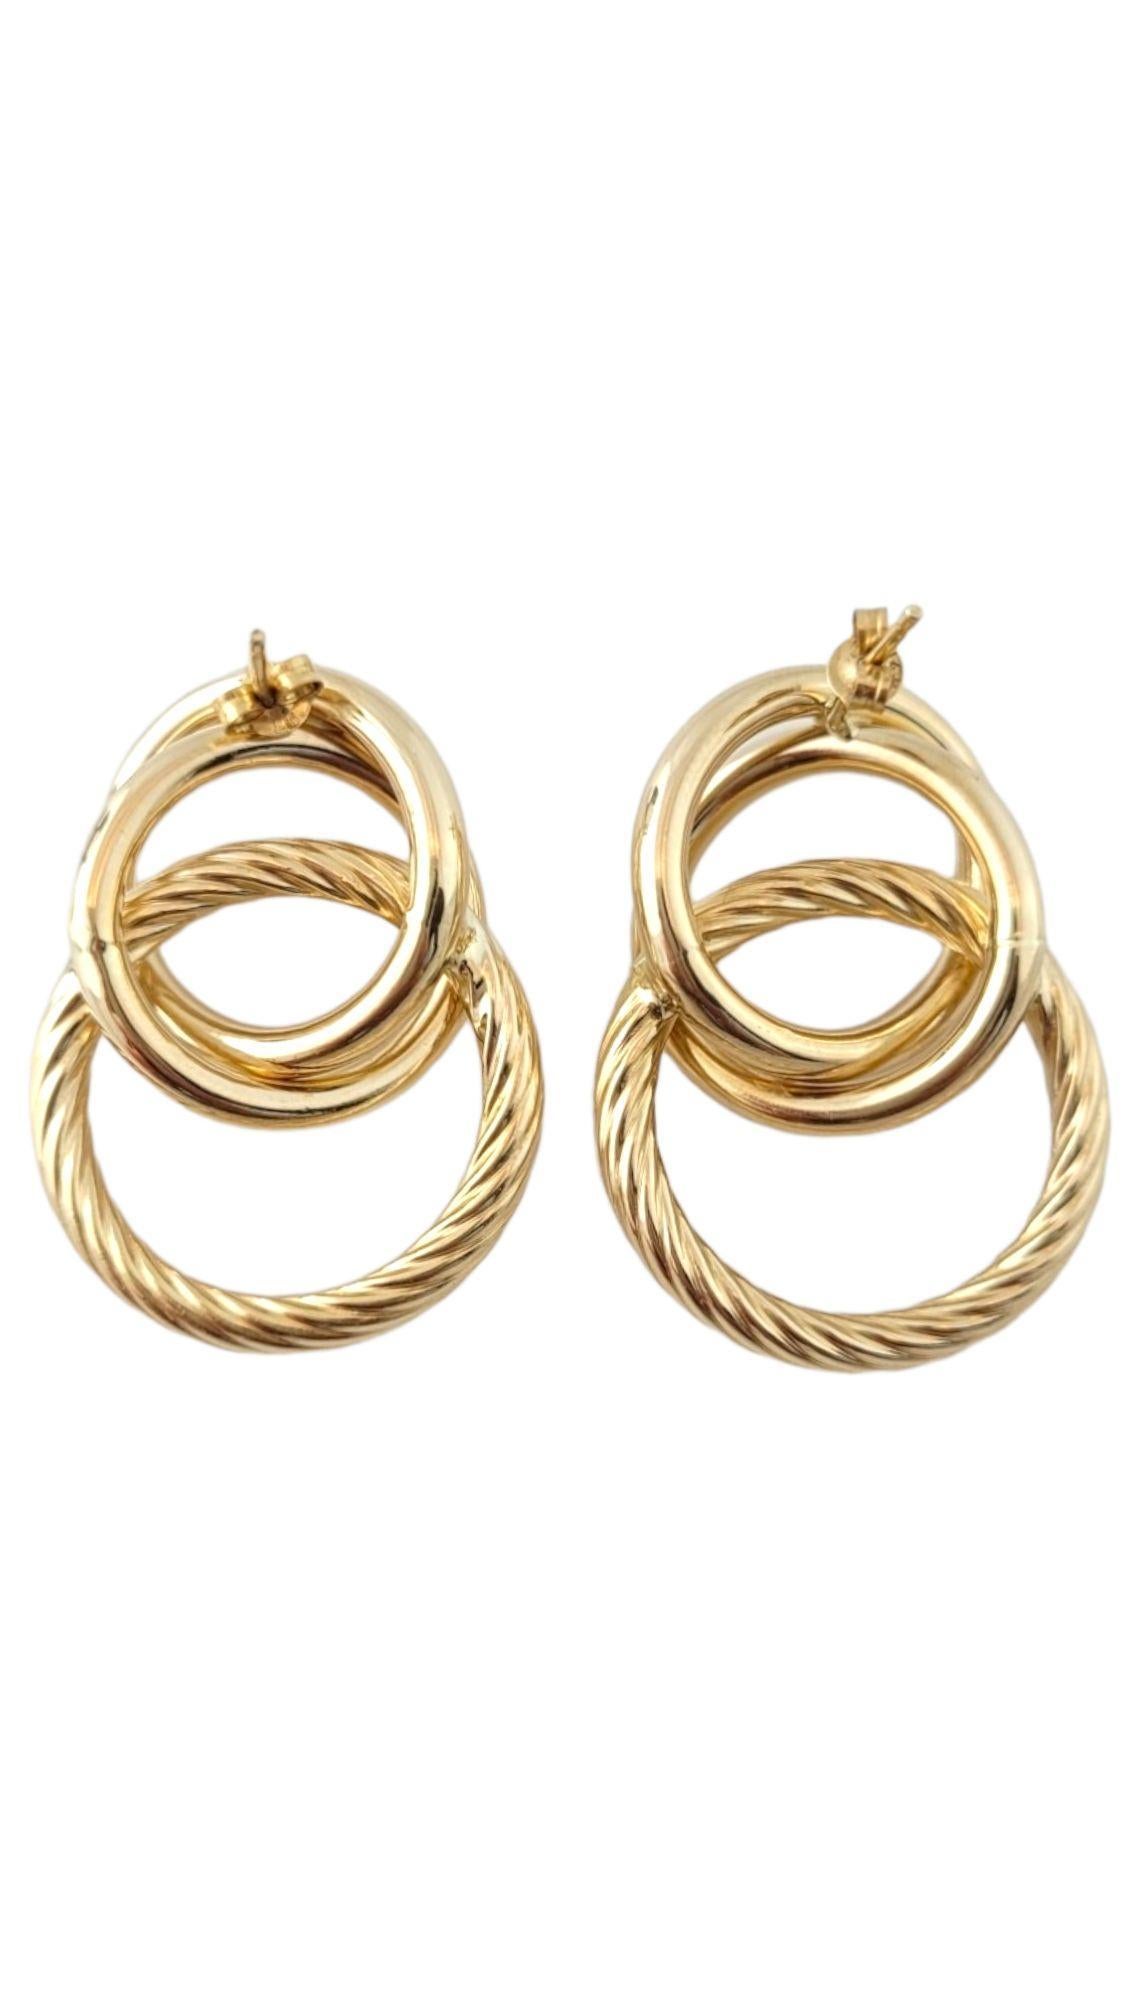 14K Yellow Gold Triple Twisted Circle Drop Earrings #15025 In Good Condition For Sale In Washington Depot, CT